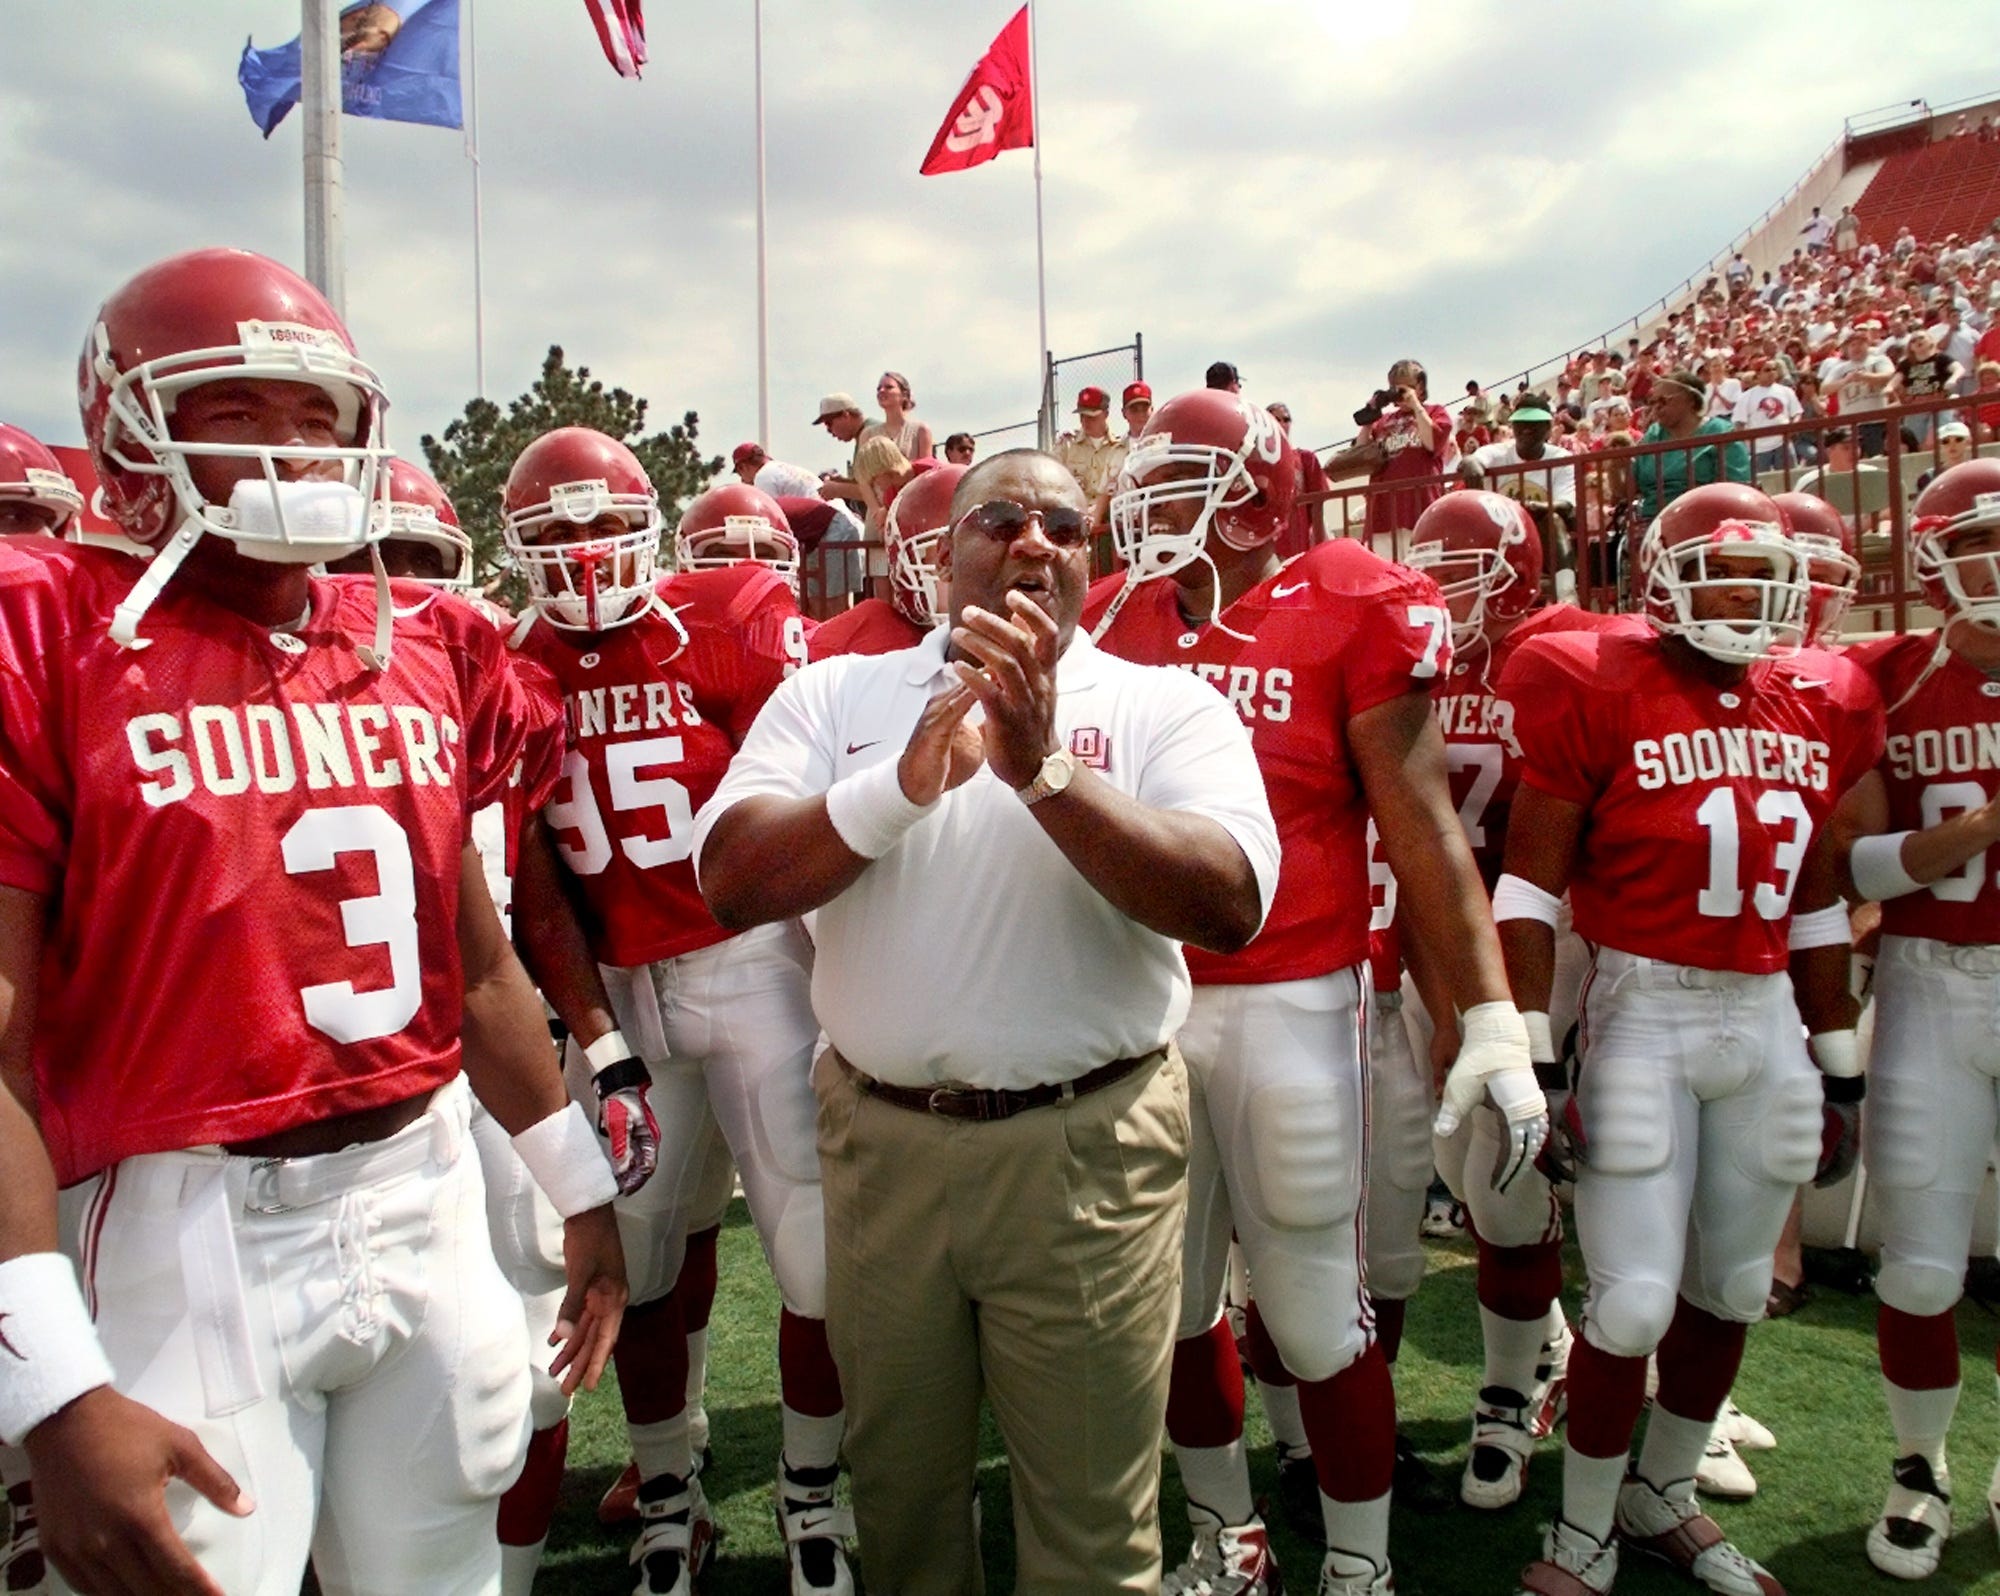 OU football: John Blake, former Sooners coach and player, dies at age 59